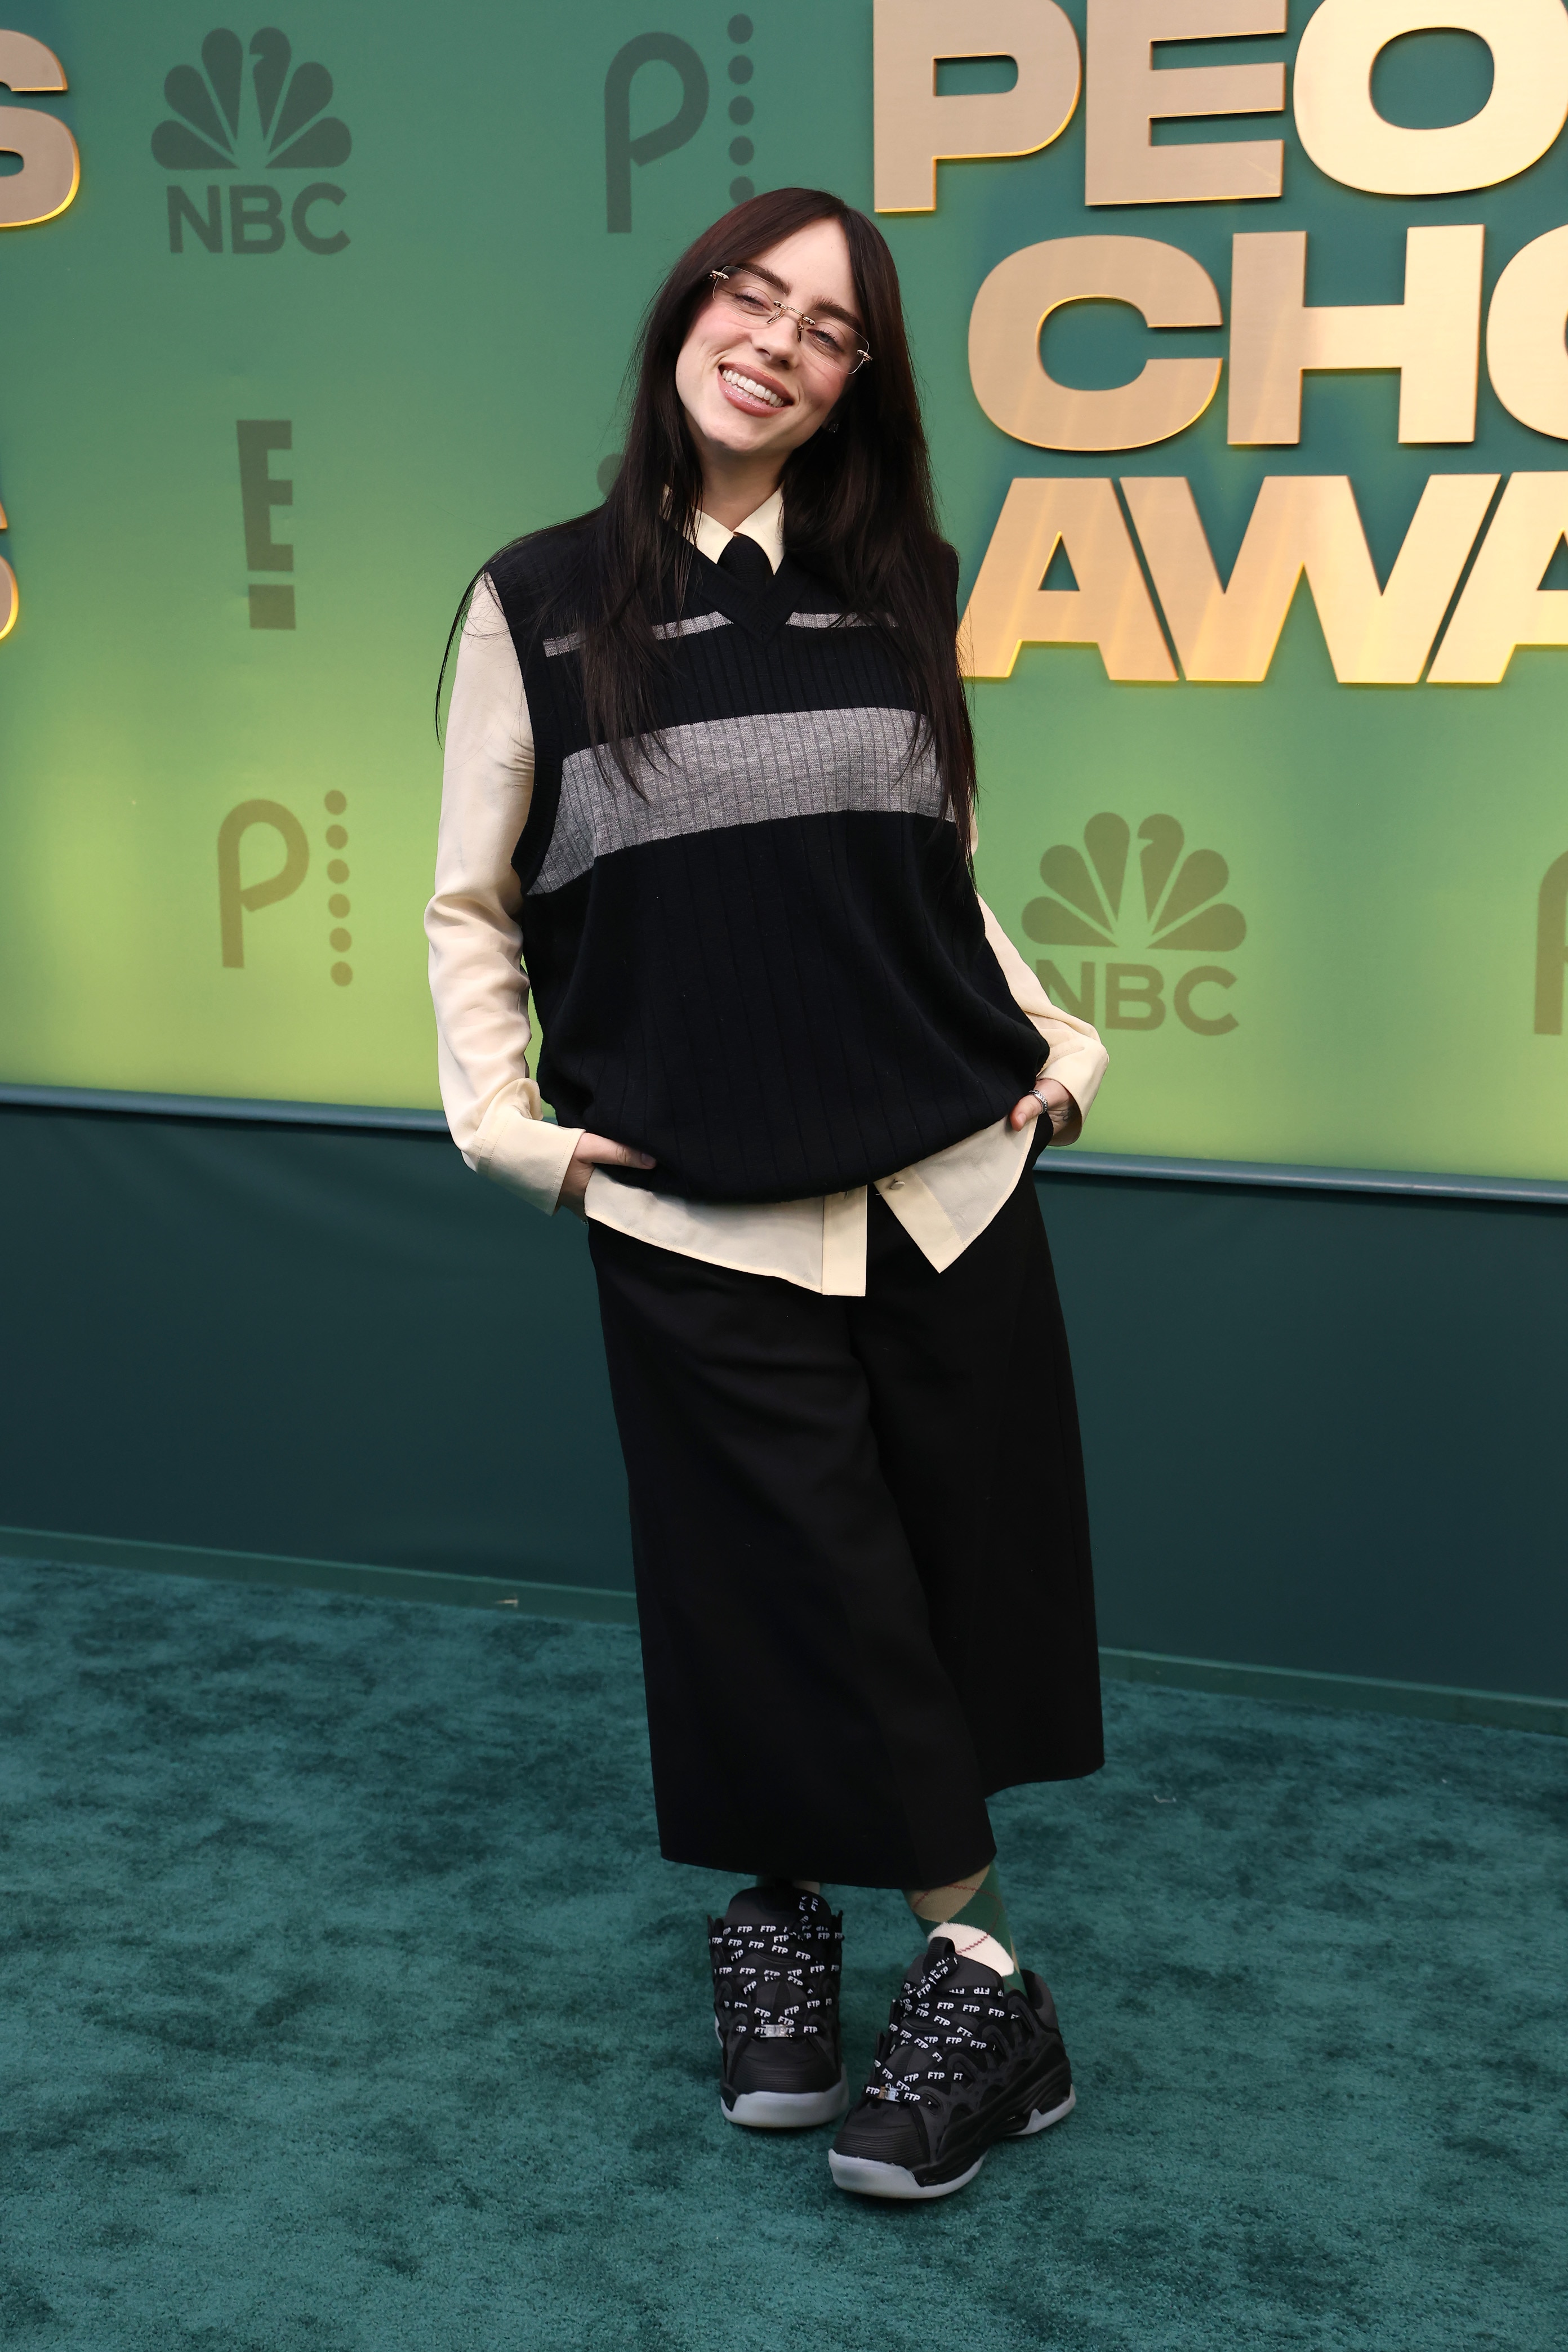 Billie Eilish on the red carpet in a black long skirt, a white collard top and black vest